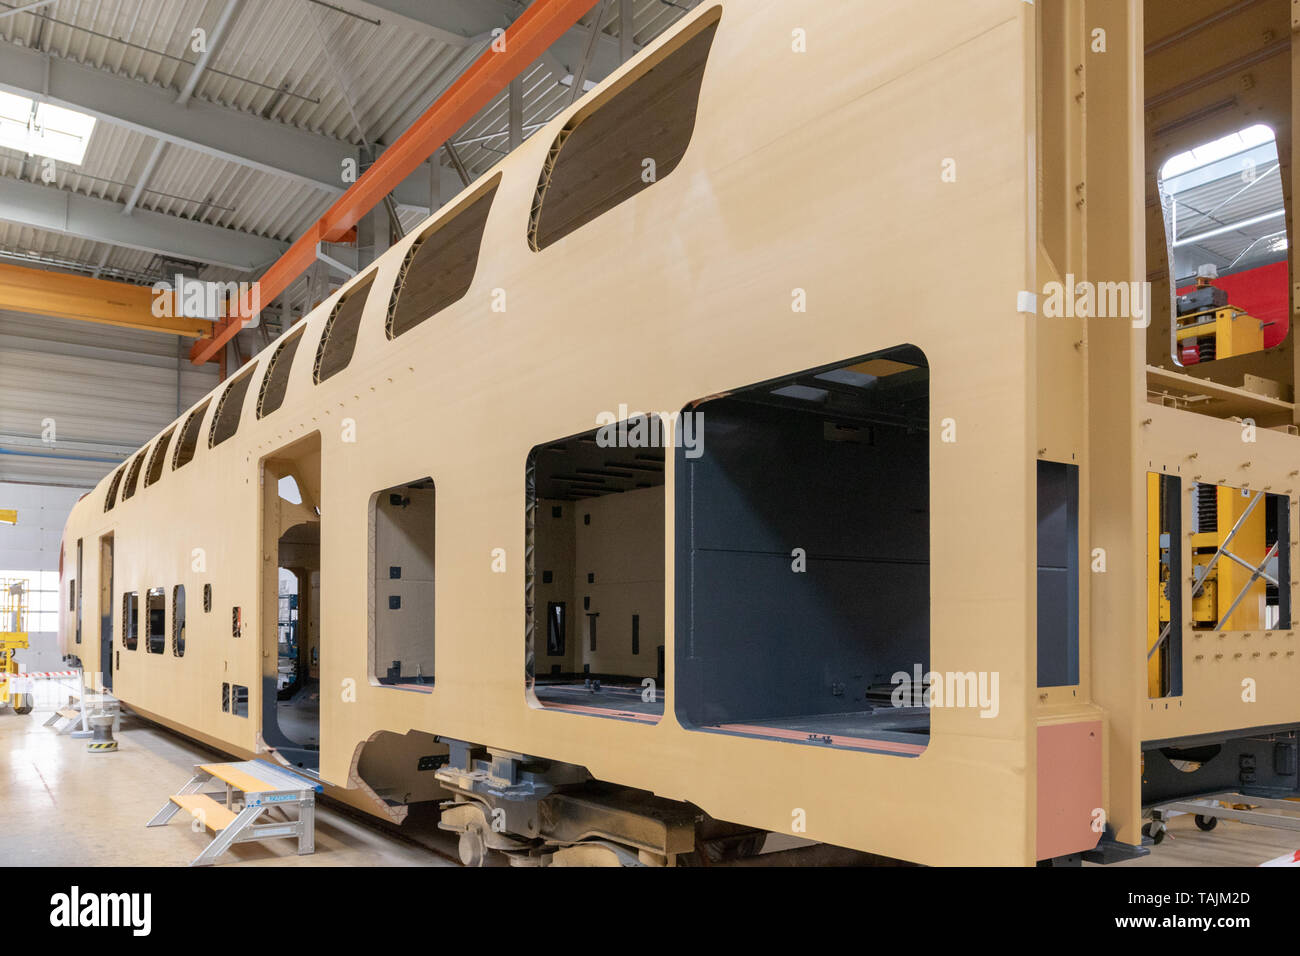 Görlitz, Germany, May 25, 2019 - At the Bombardier plant in Görlitz, new Twindexx double-decker coaches for the Swiss Federal Railways (SBB) are currently under construction. Stock Photo